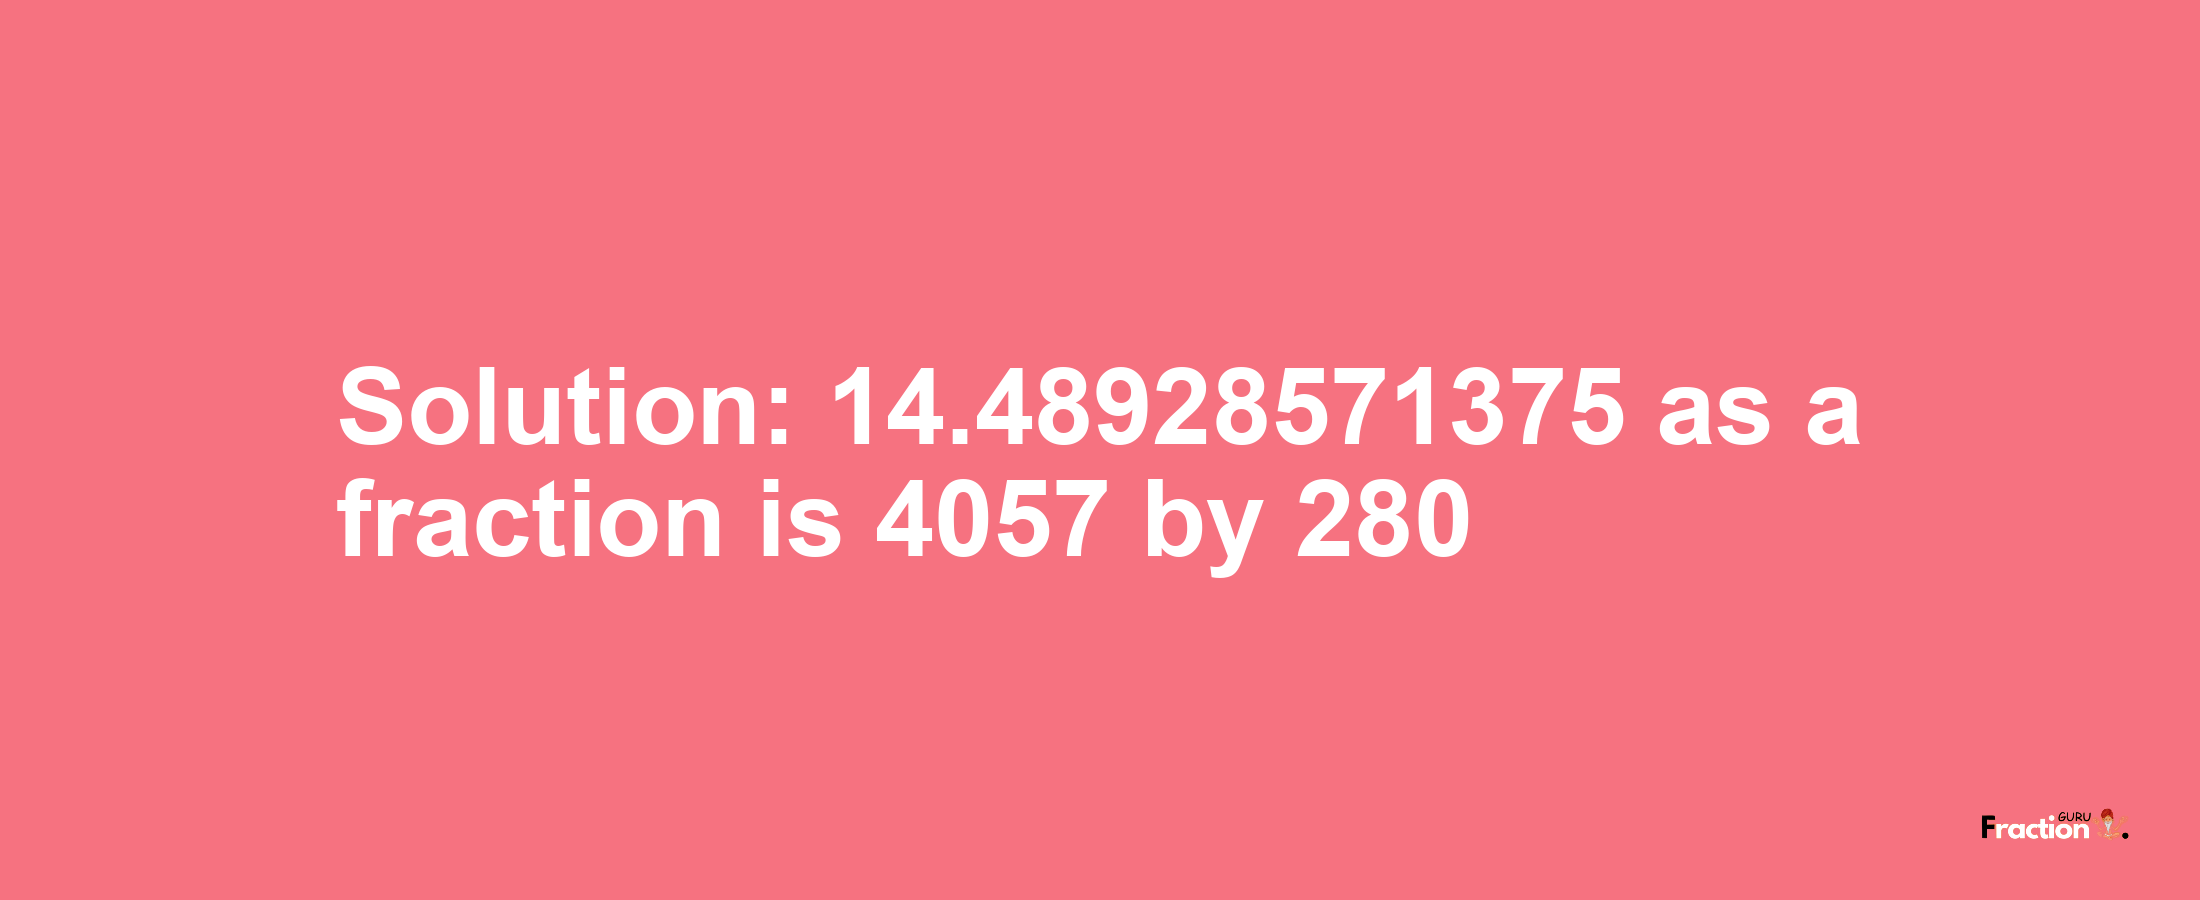 Solution:14.48928571375 as a fraction is 4057/280